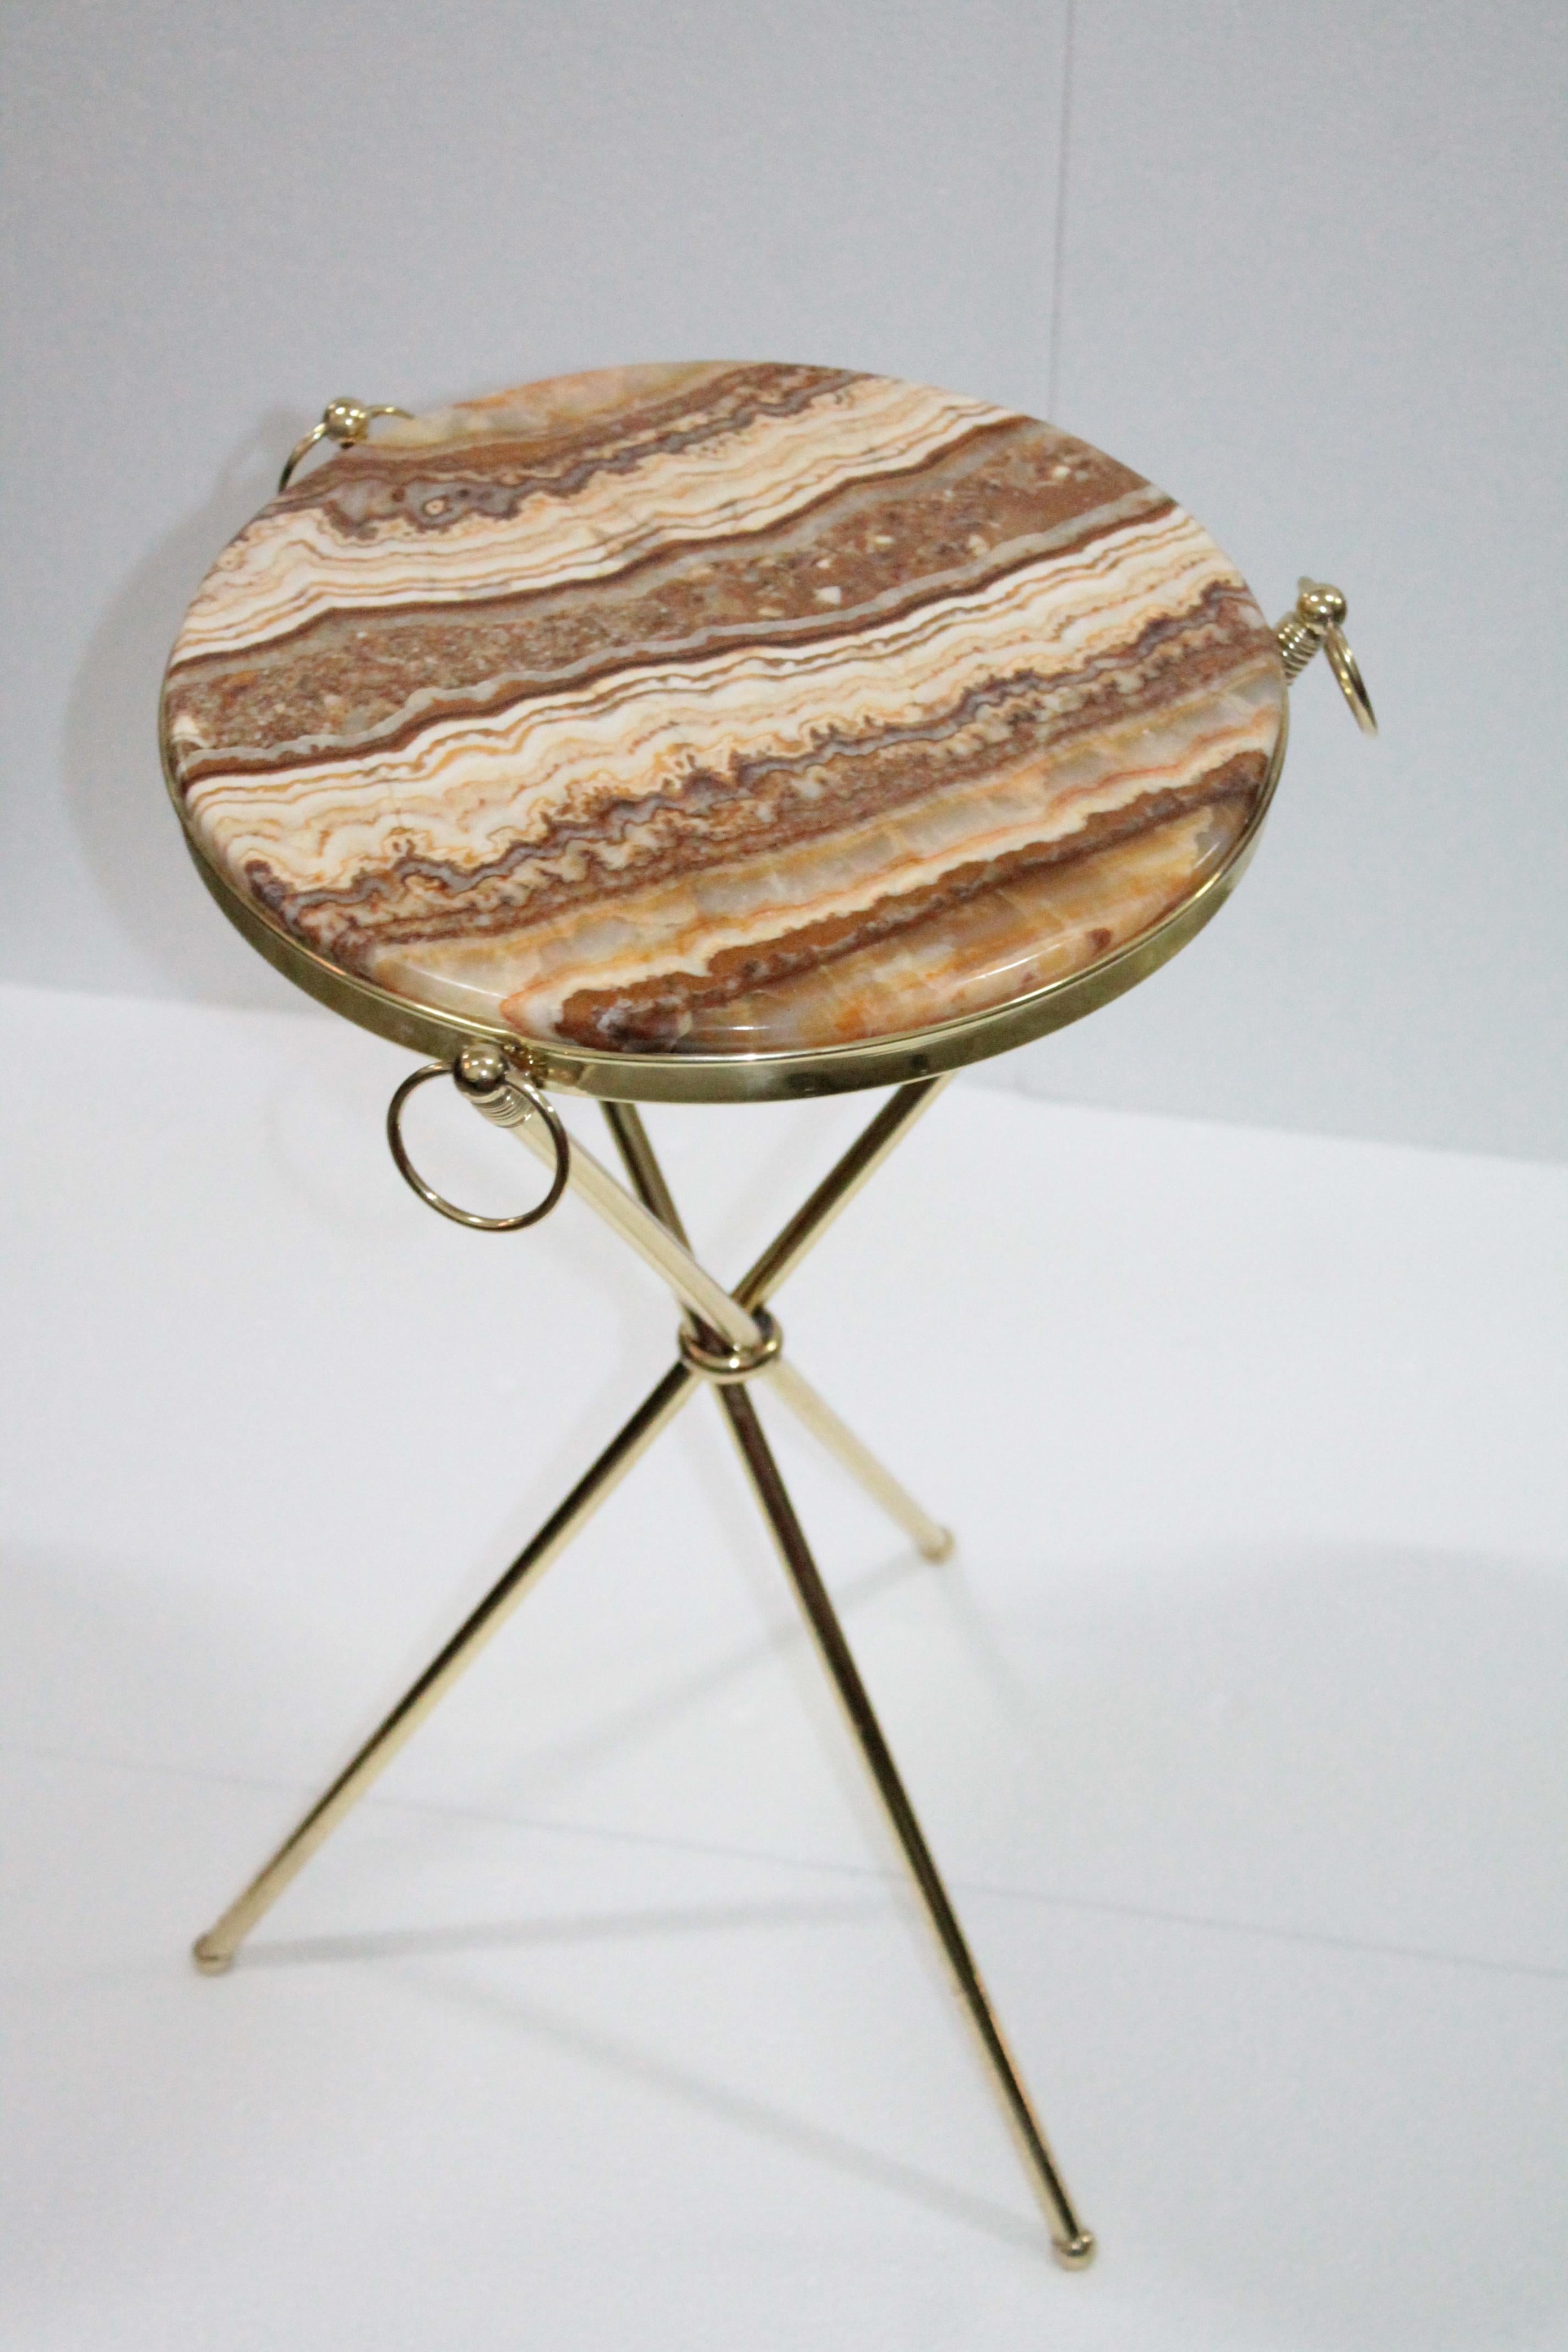 Mid-20th Century Midcentury Italian Tripod Round Side Table 1950s Brass and Onyx Marble